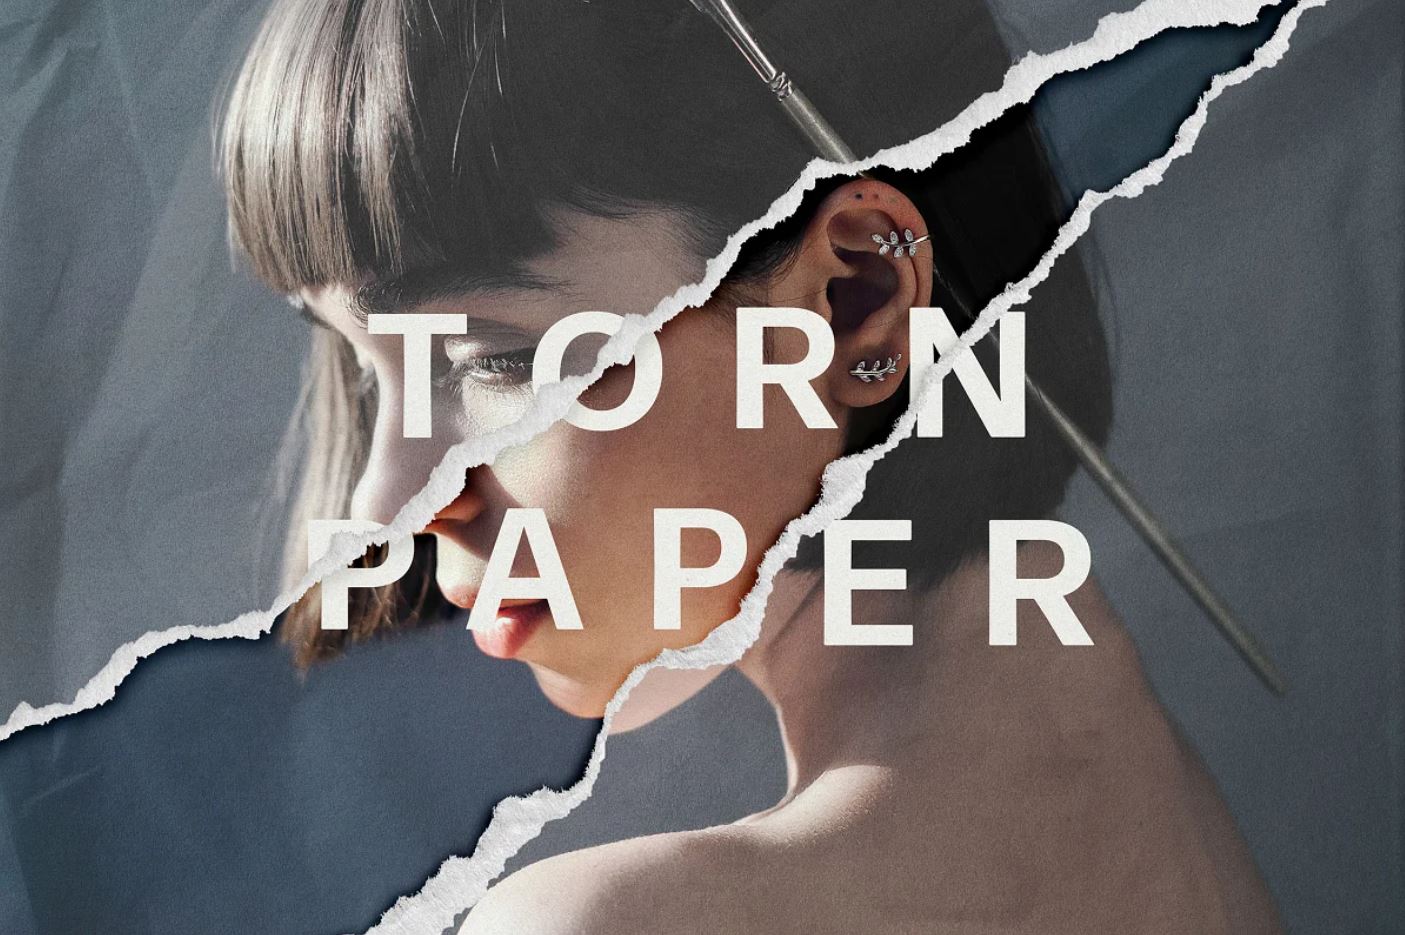 High Quality Vintage Ripped Paper Effect Download